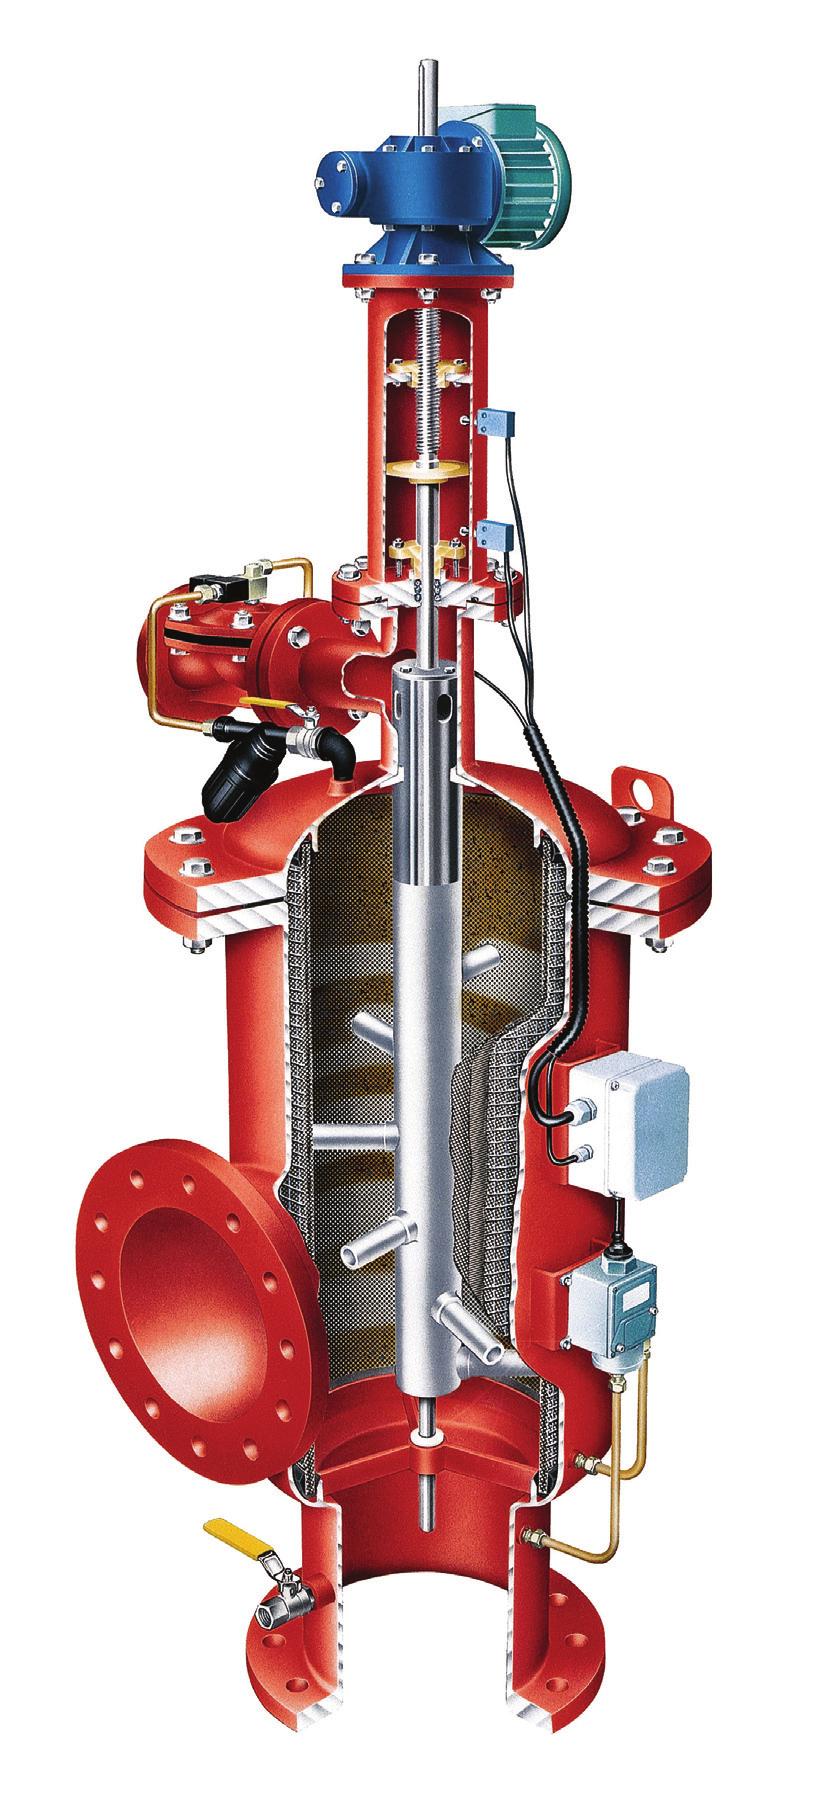 EBS Filters The largest automatic self-cleaning filter for fine filtration flowrates filtration degrees water for cleaning minimum operating pressure up to 7200 m 3 /h (32000 US gpm) 800-10 micron